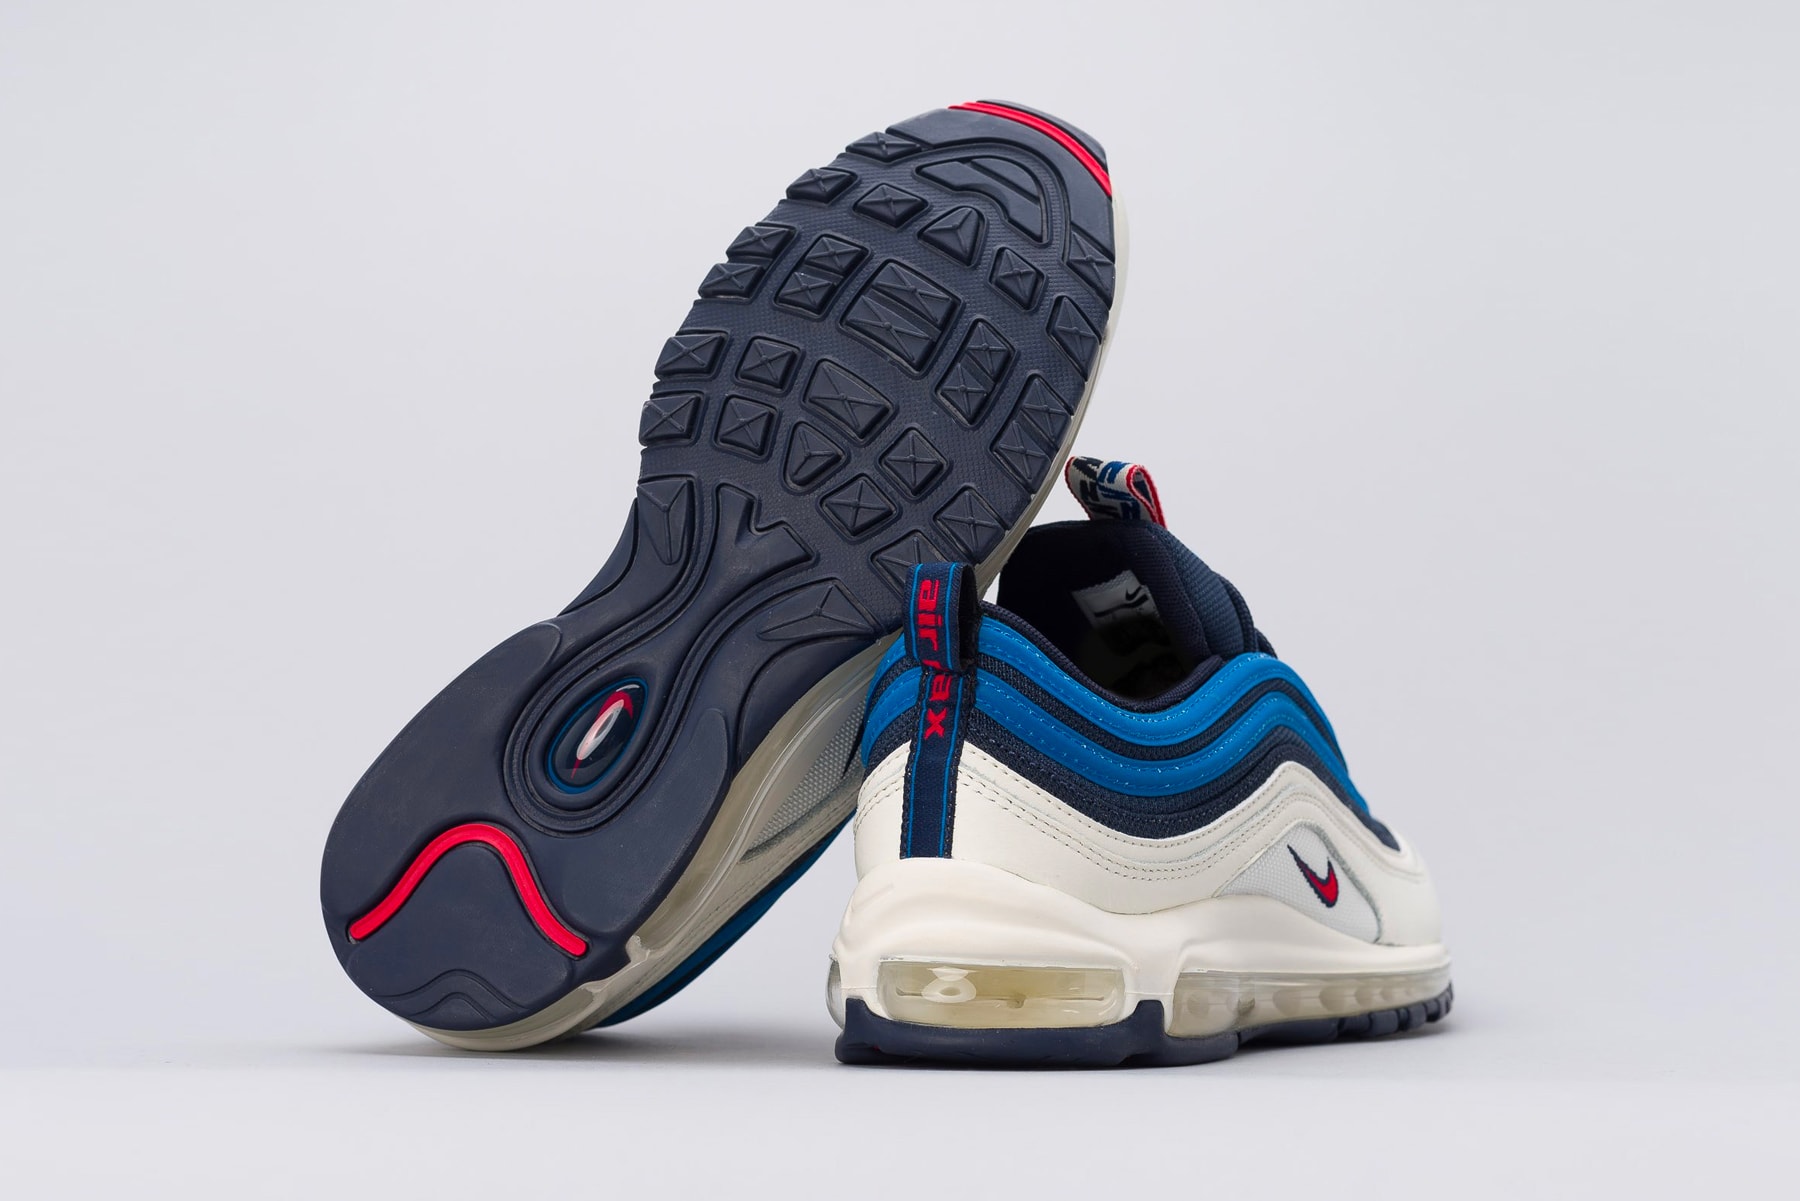 Nike Air Max 97 Pull Tab blue white red release info sneakers footwear